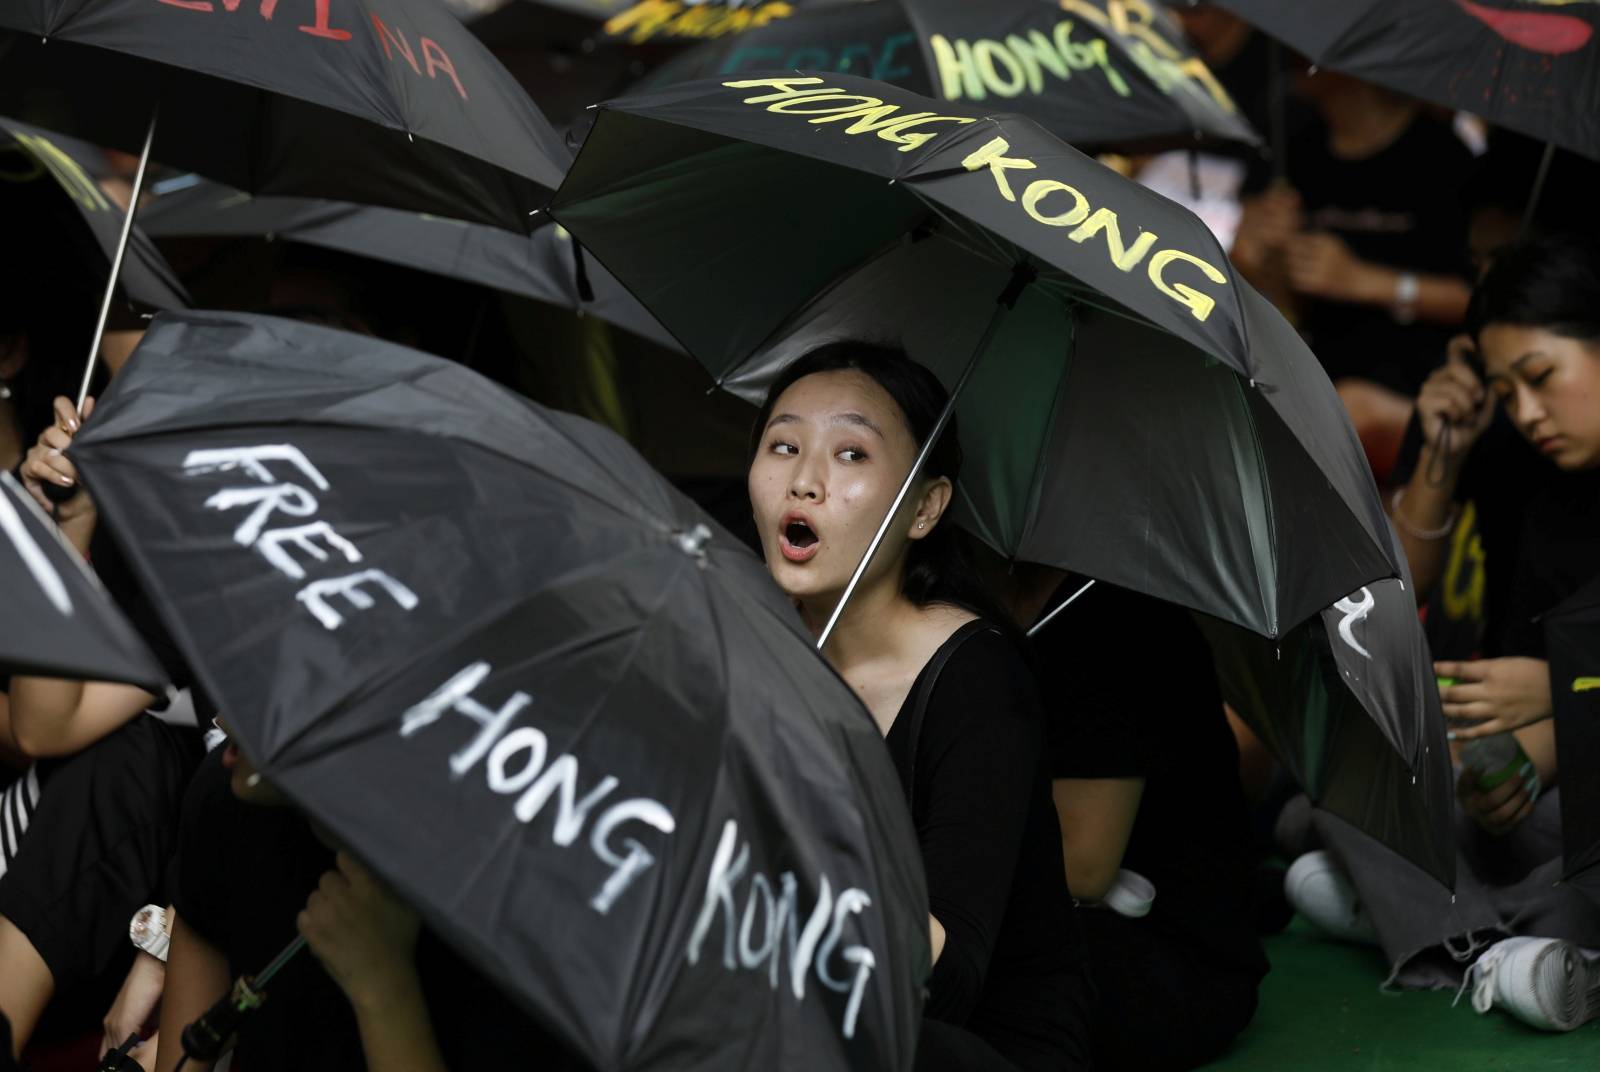 A Tibetan exile shouts slogan during a protest to support Hong Kong pro-democracy protestors, in New Delhi